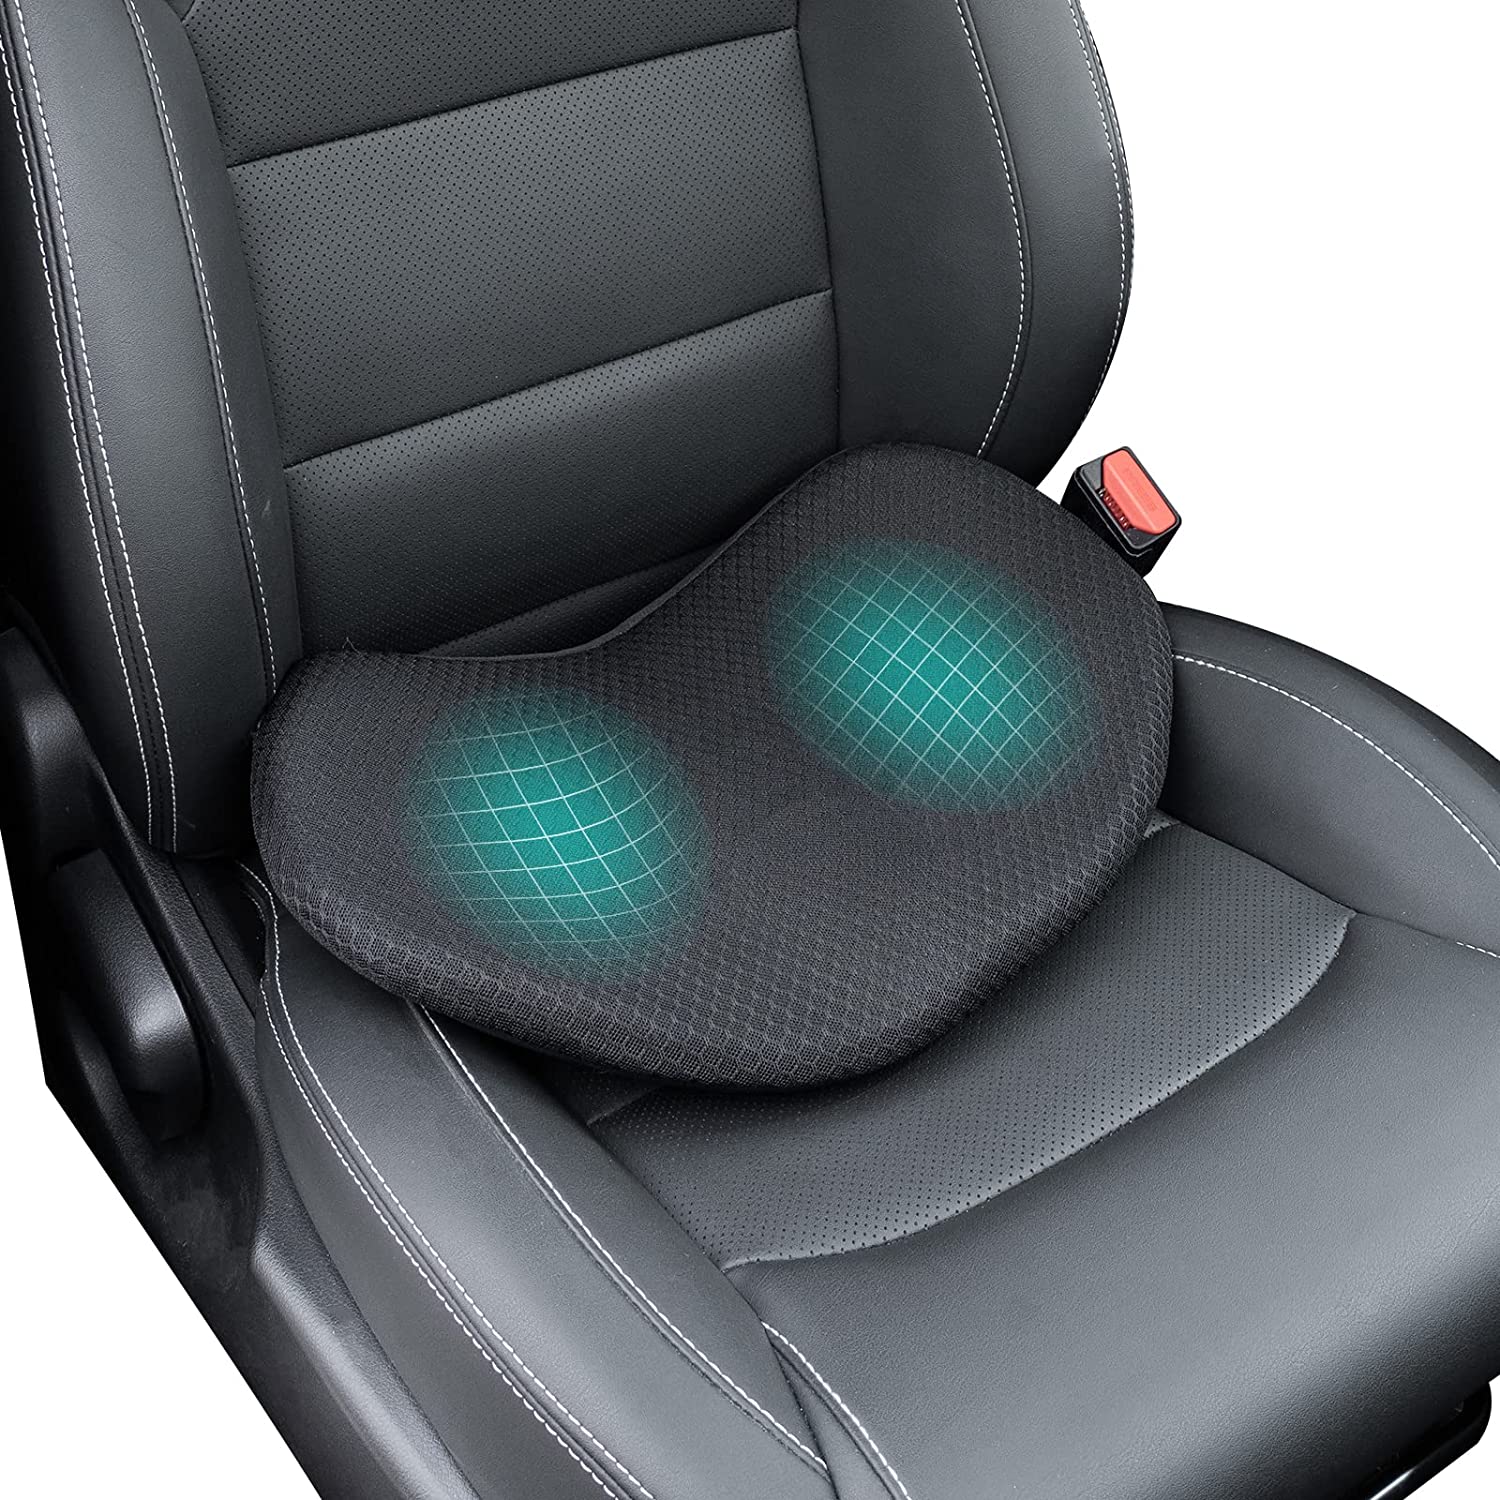 1*Car Booster Seat Cushion Raise the Height for Short People Driving-Memory  Foam